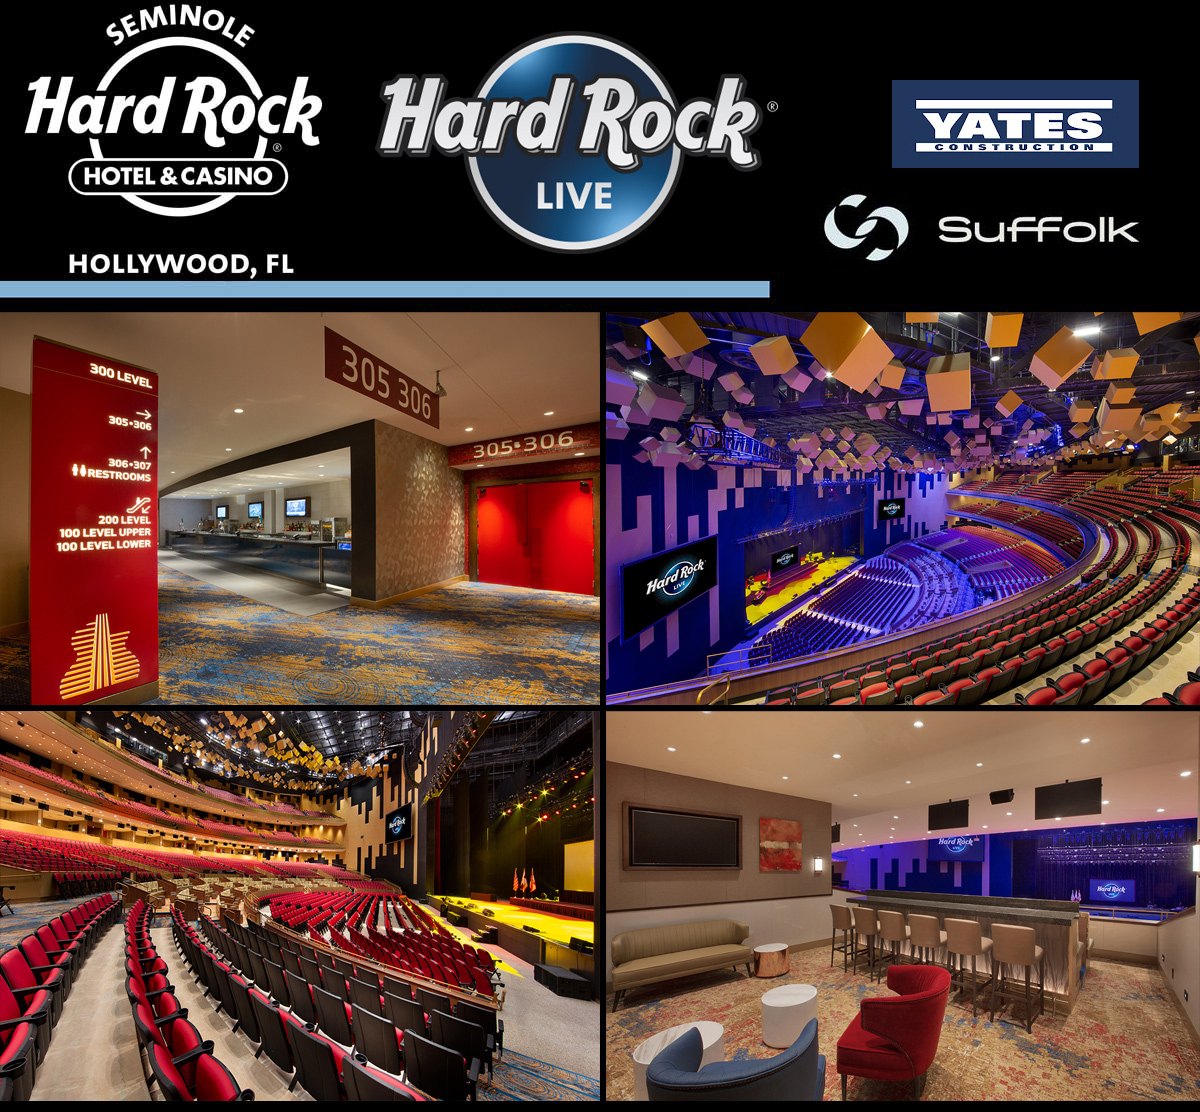 Hard Rock Hollywood hotel and casino Live.